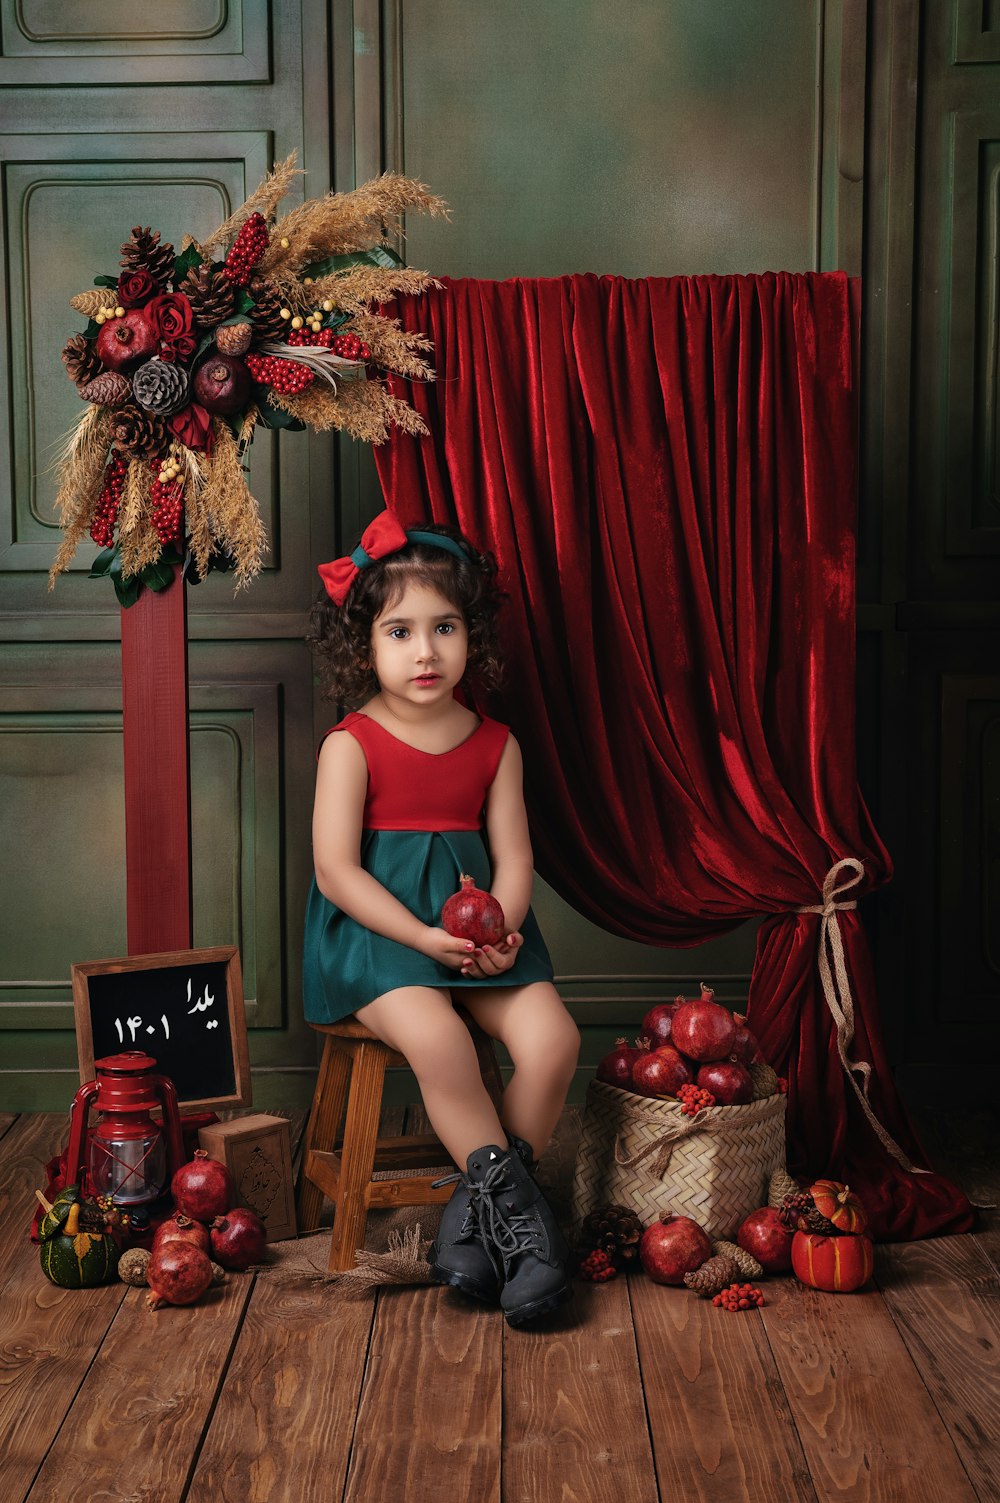 a little girl sitting on a stool with apples